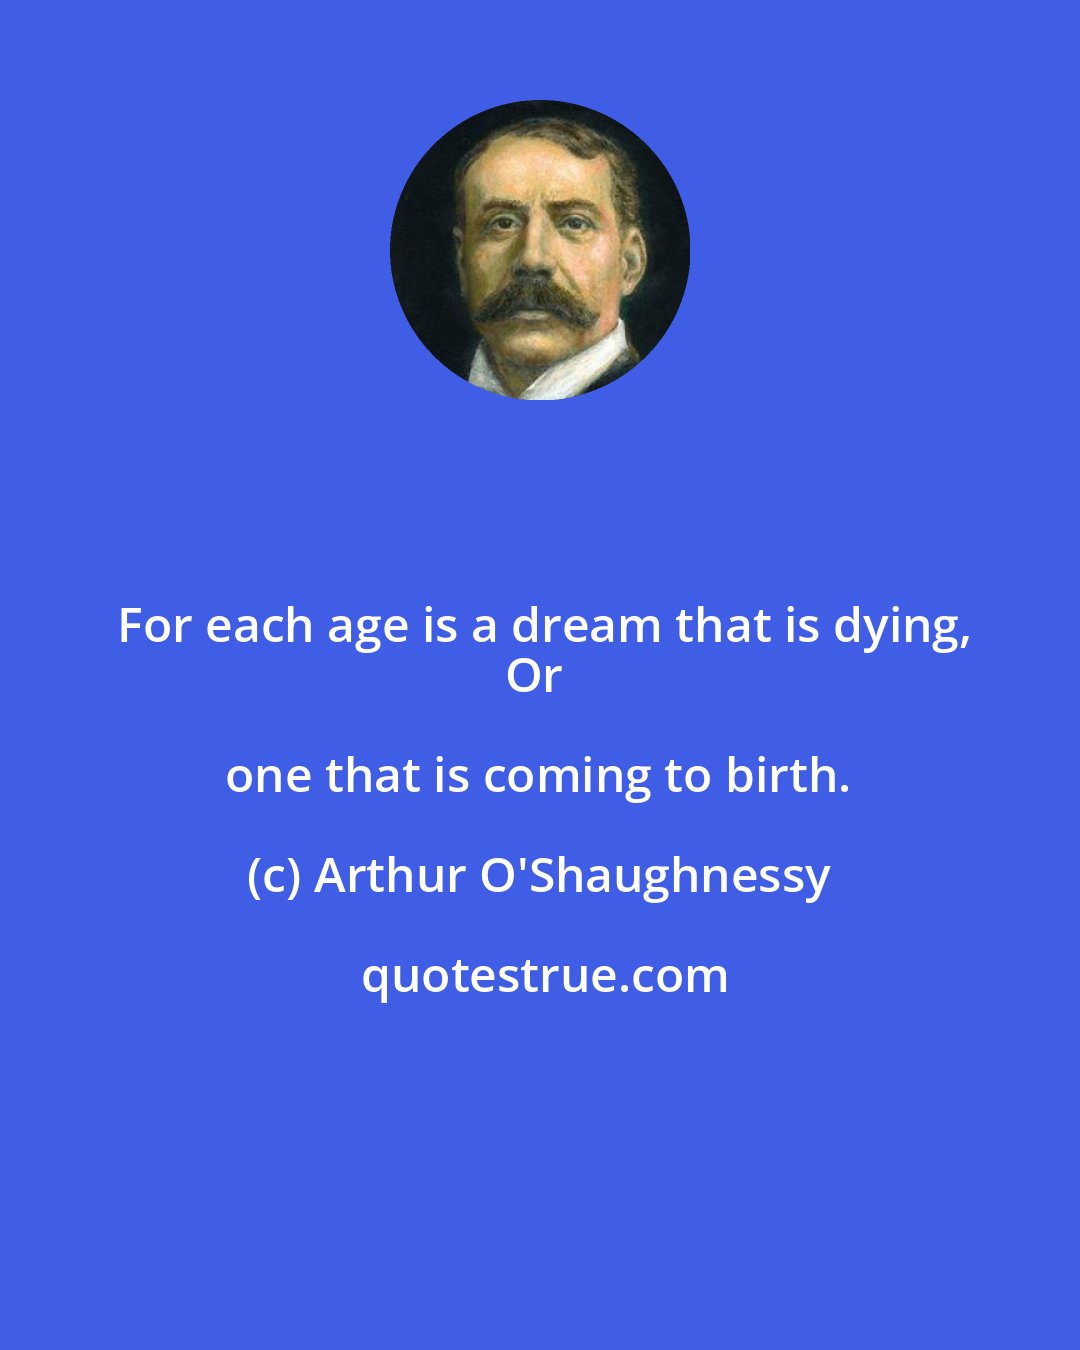 Arthur O'Shaughnessy: For each age is a dream that is dying,
Or one that is coming to birth.